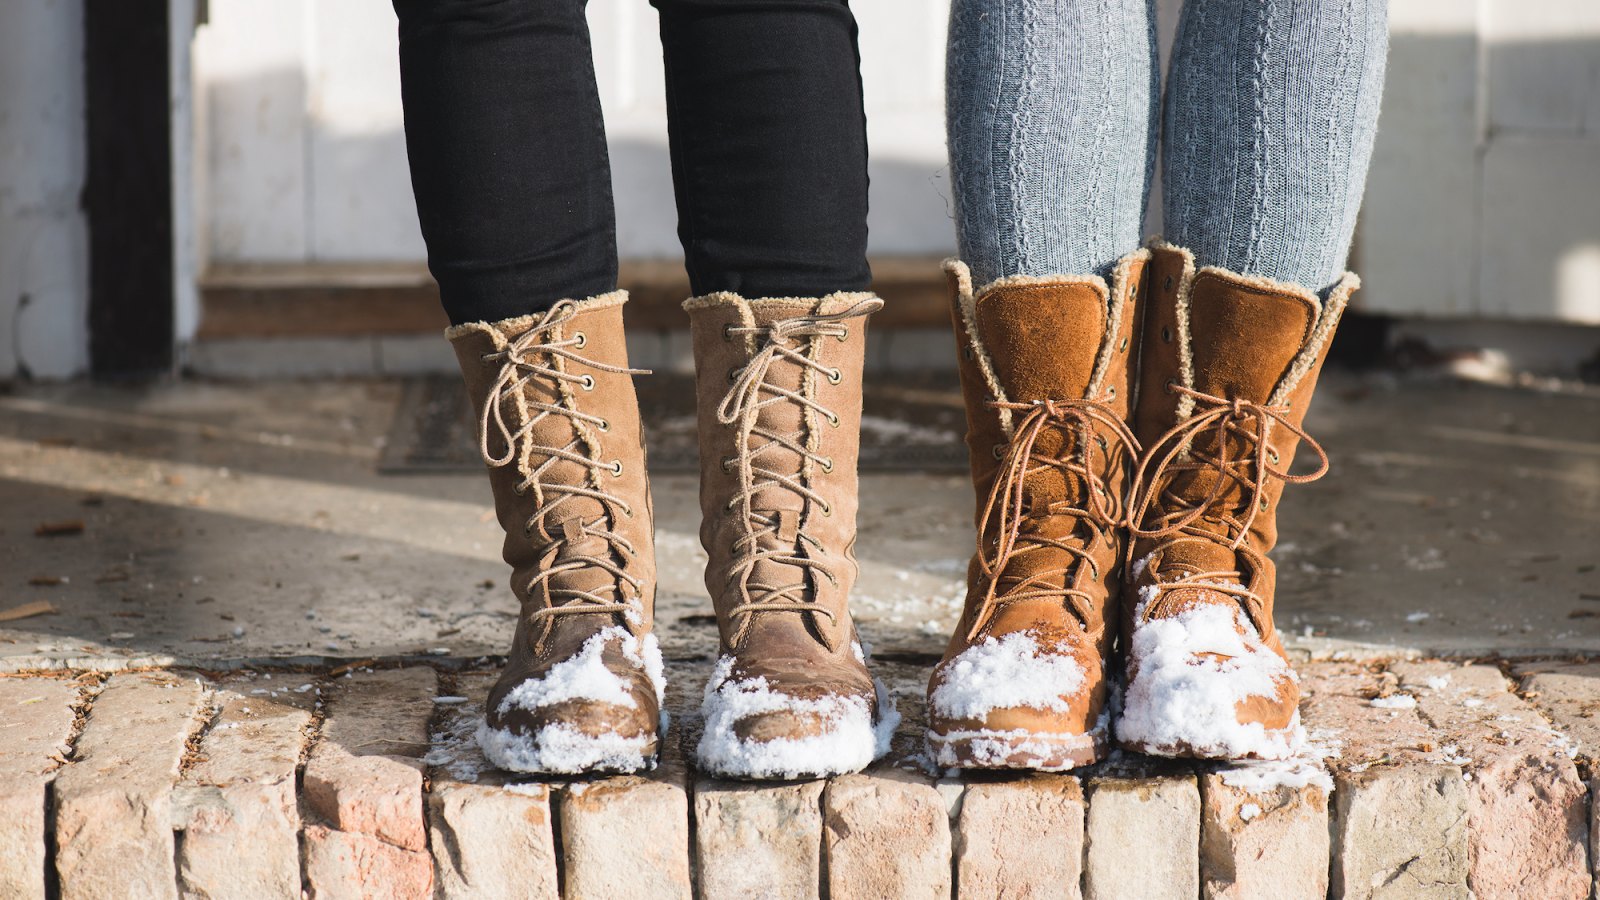 5 Best Platform Boots For Women To Choose For Winter-Dream Pairs